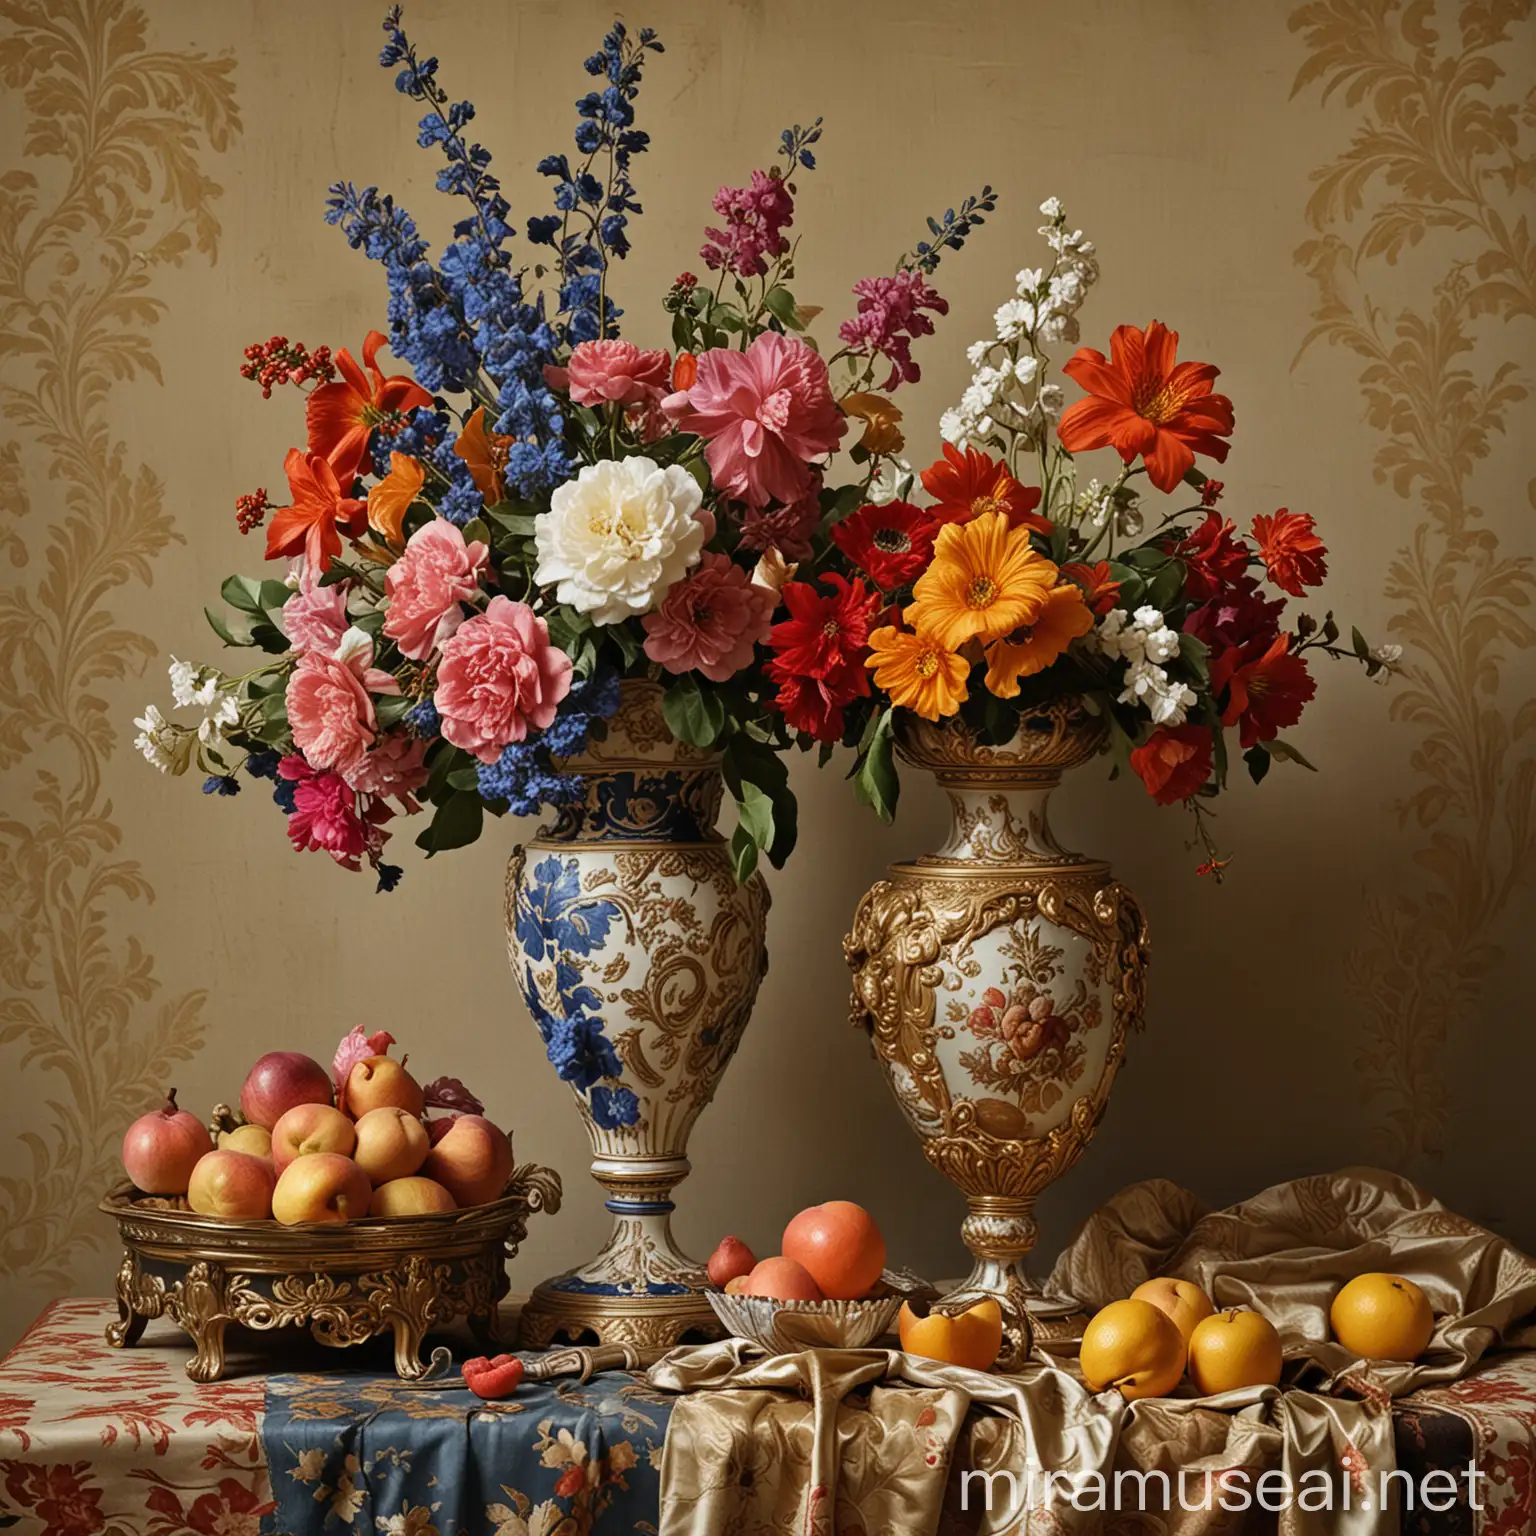 Arrange and sketch still life compositions featuring objects commonly associated with the Baroque period, such as luxurious fabrics, ornate vases, fruit, flowers, and musical instruments.